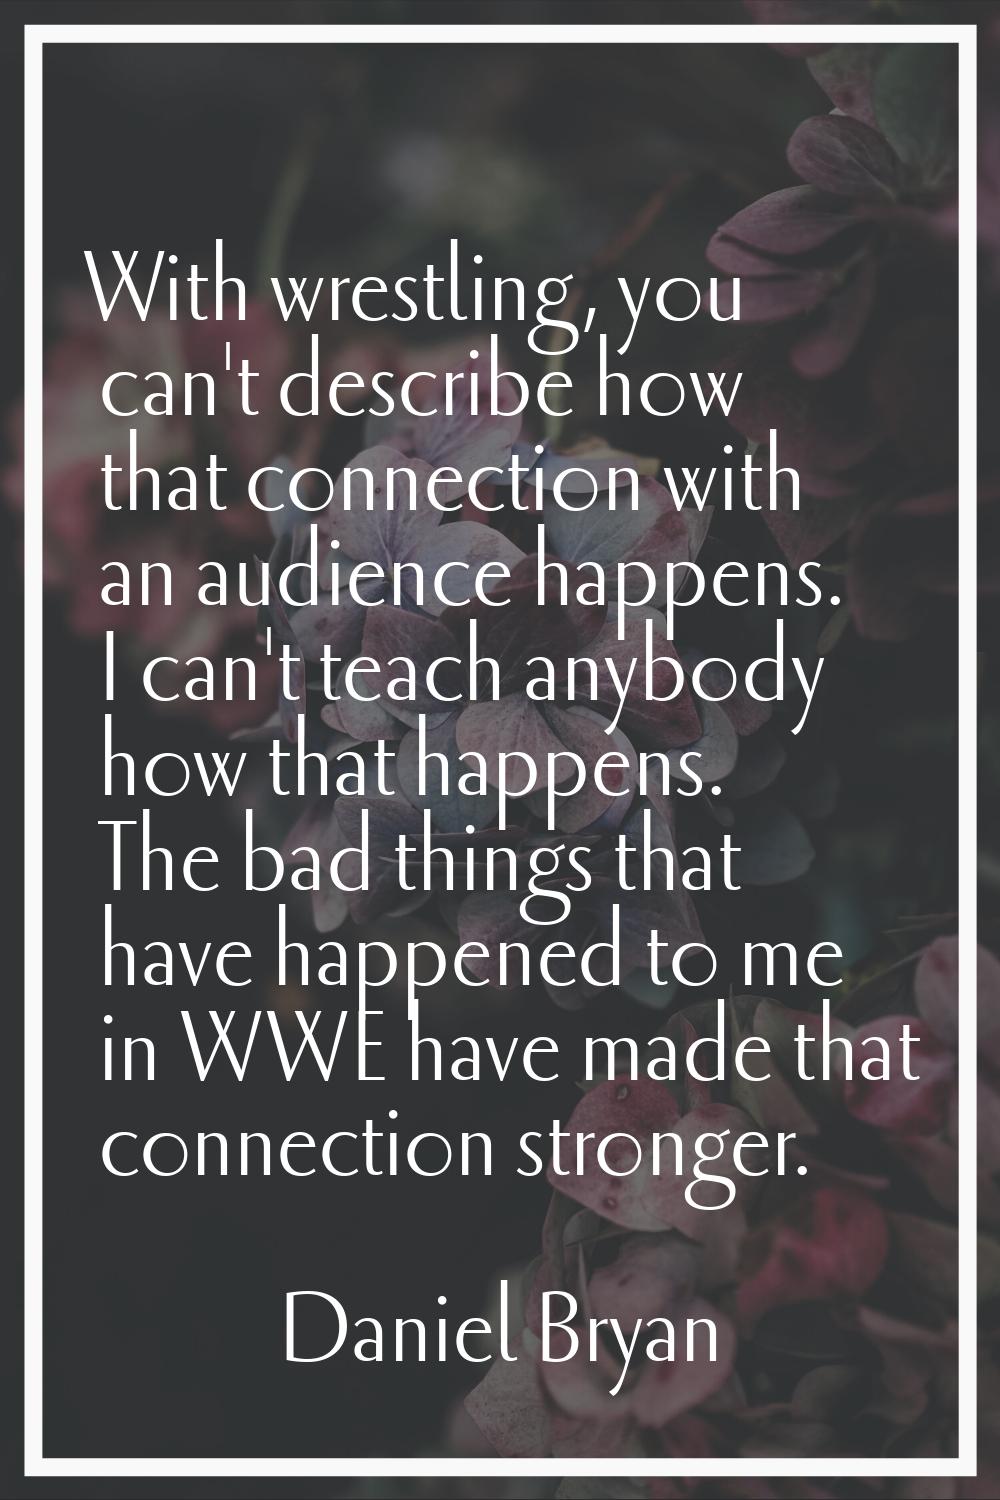 With wrestling, you can't describe how that connection with an audience happens. I can't teach anyb